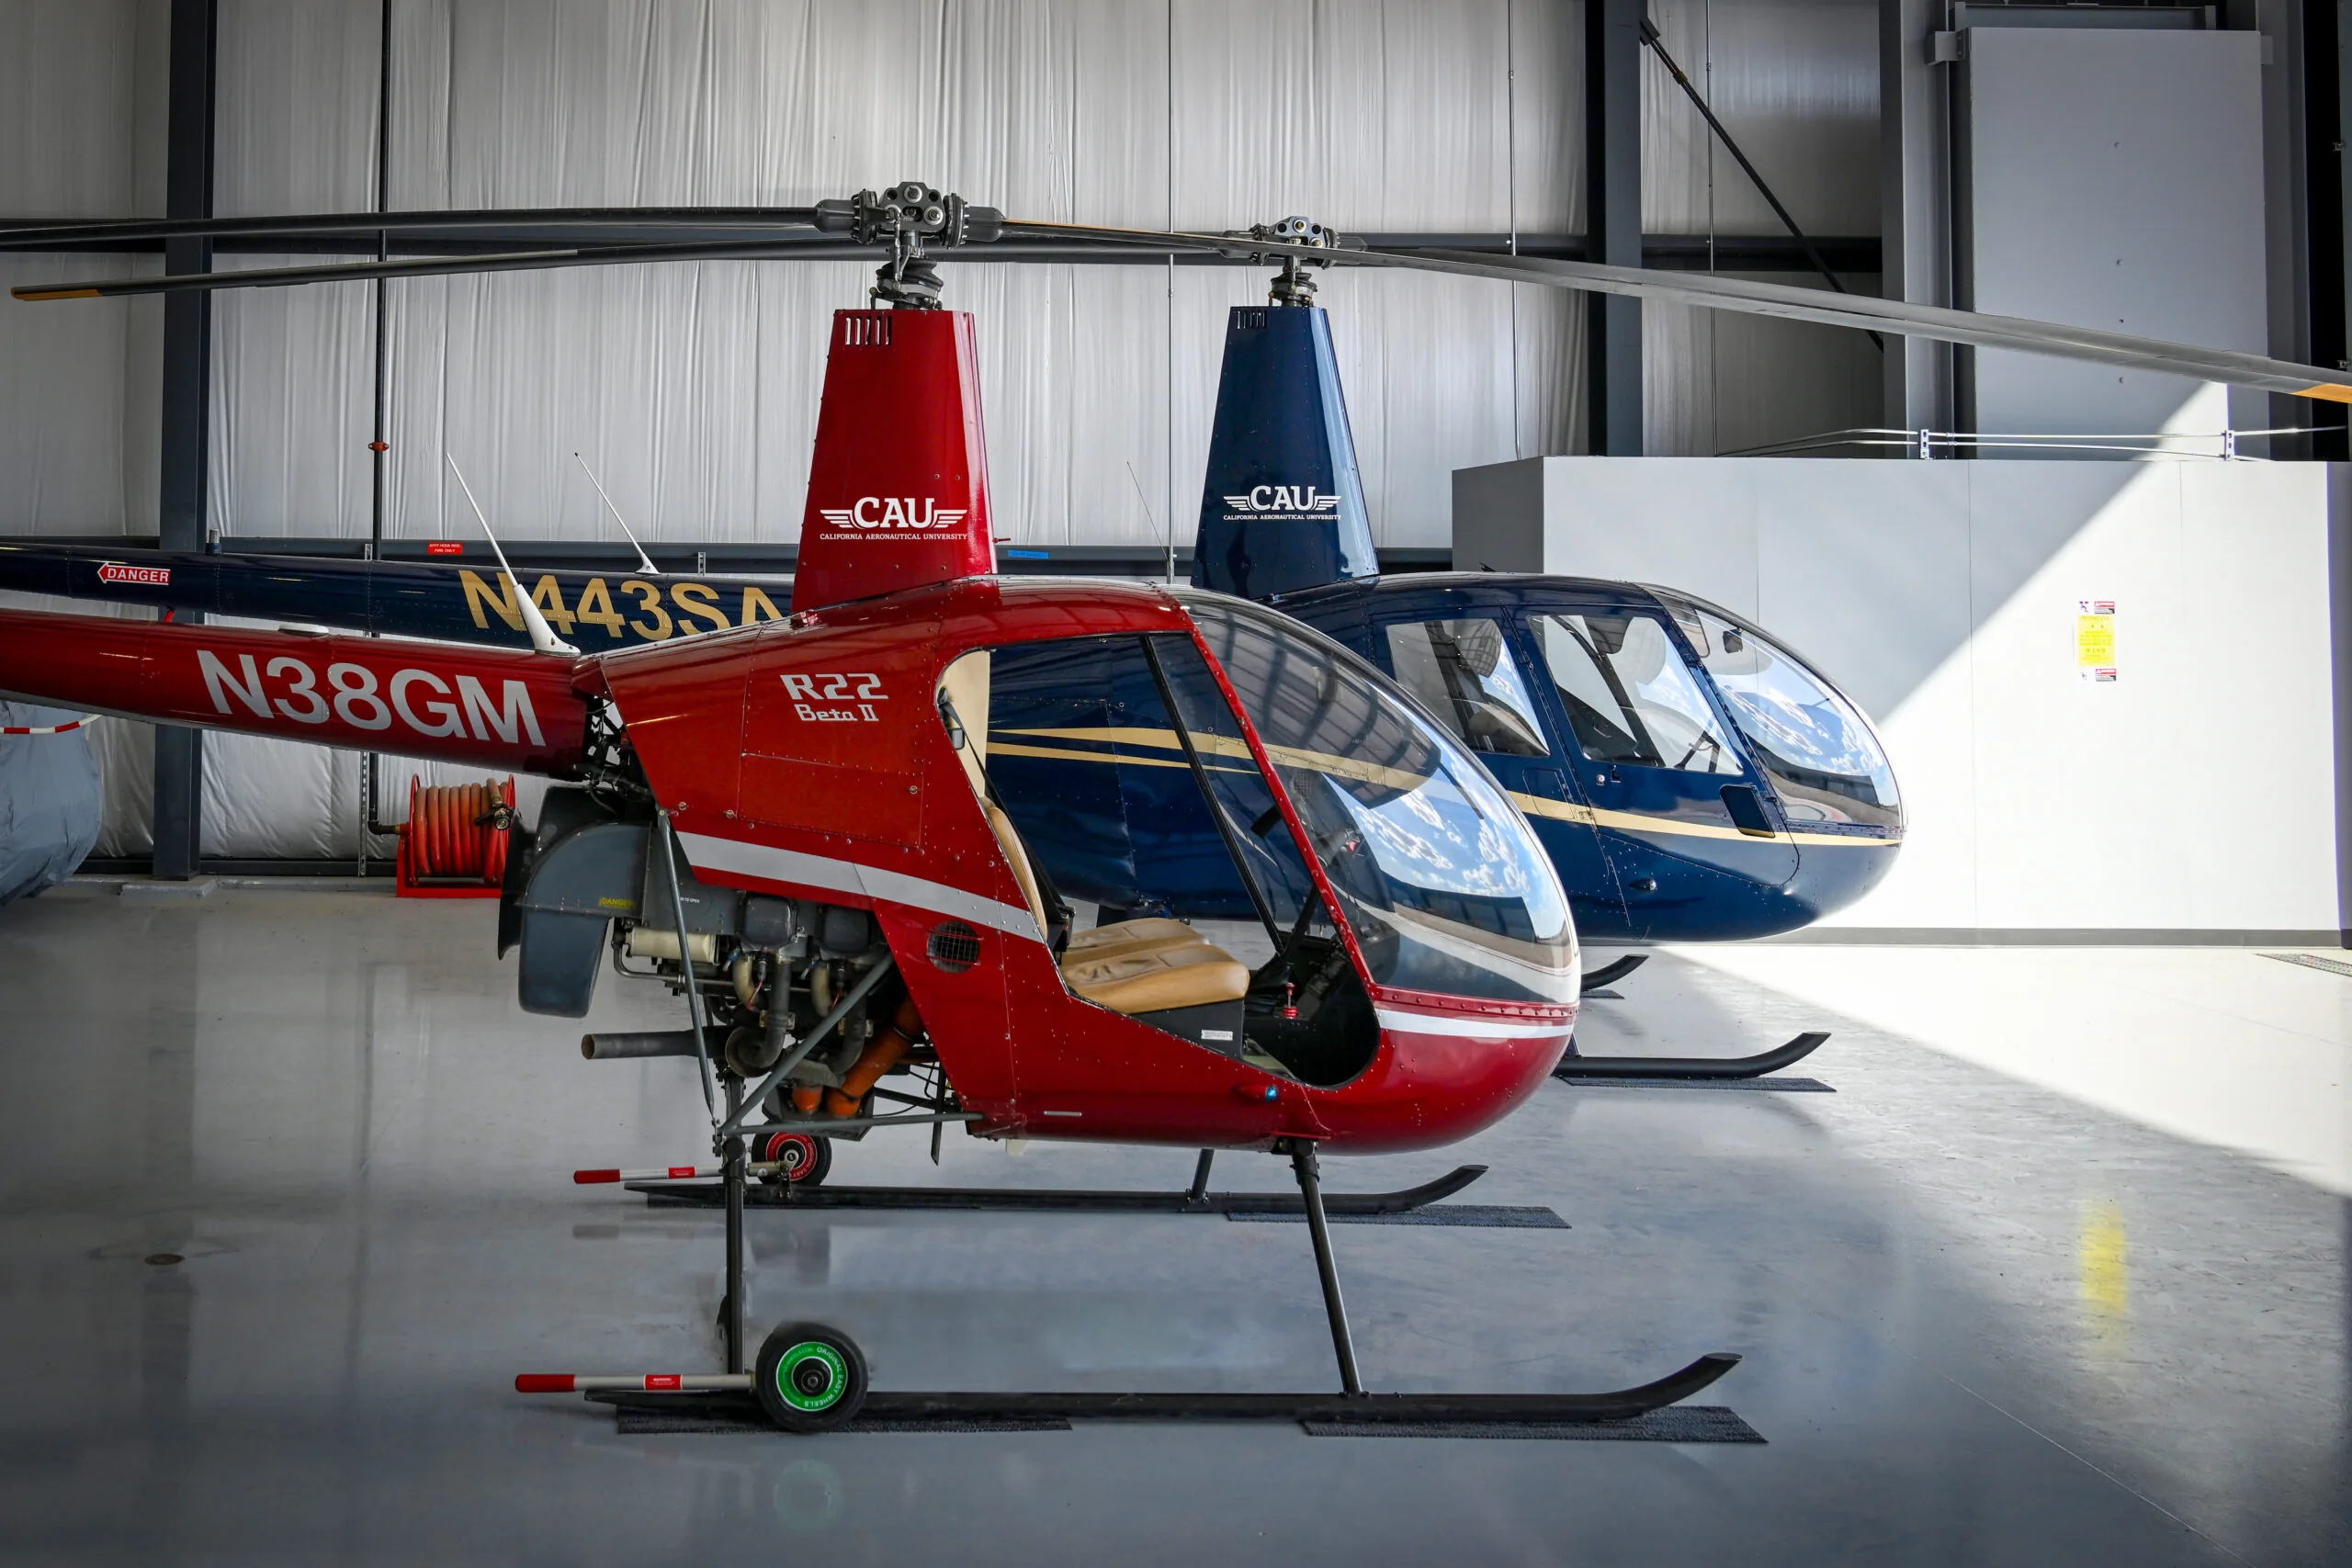 Robinson R44 and R22 Helicopter side-by-side.